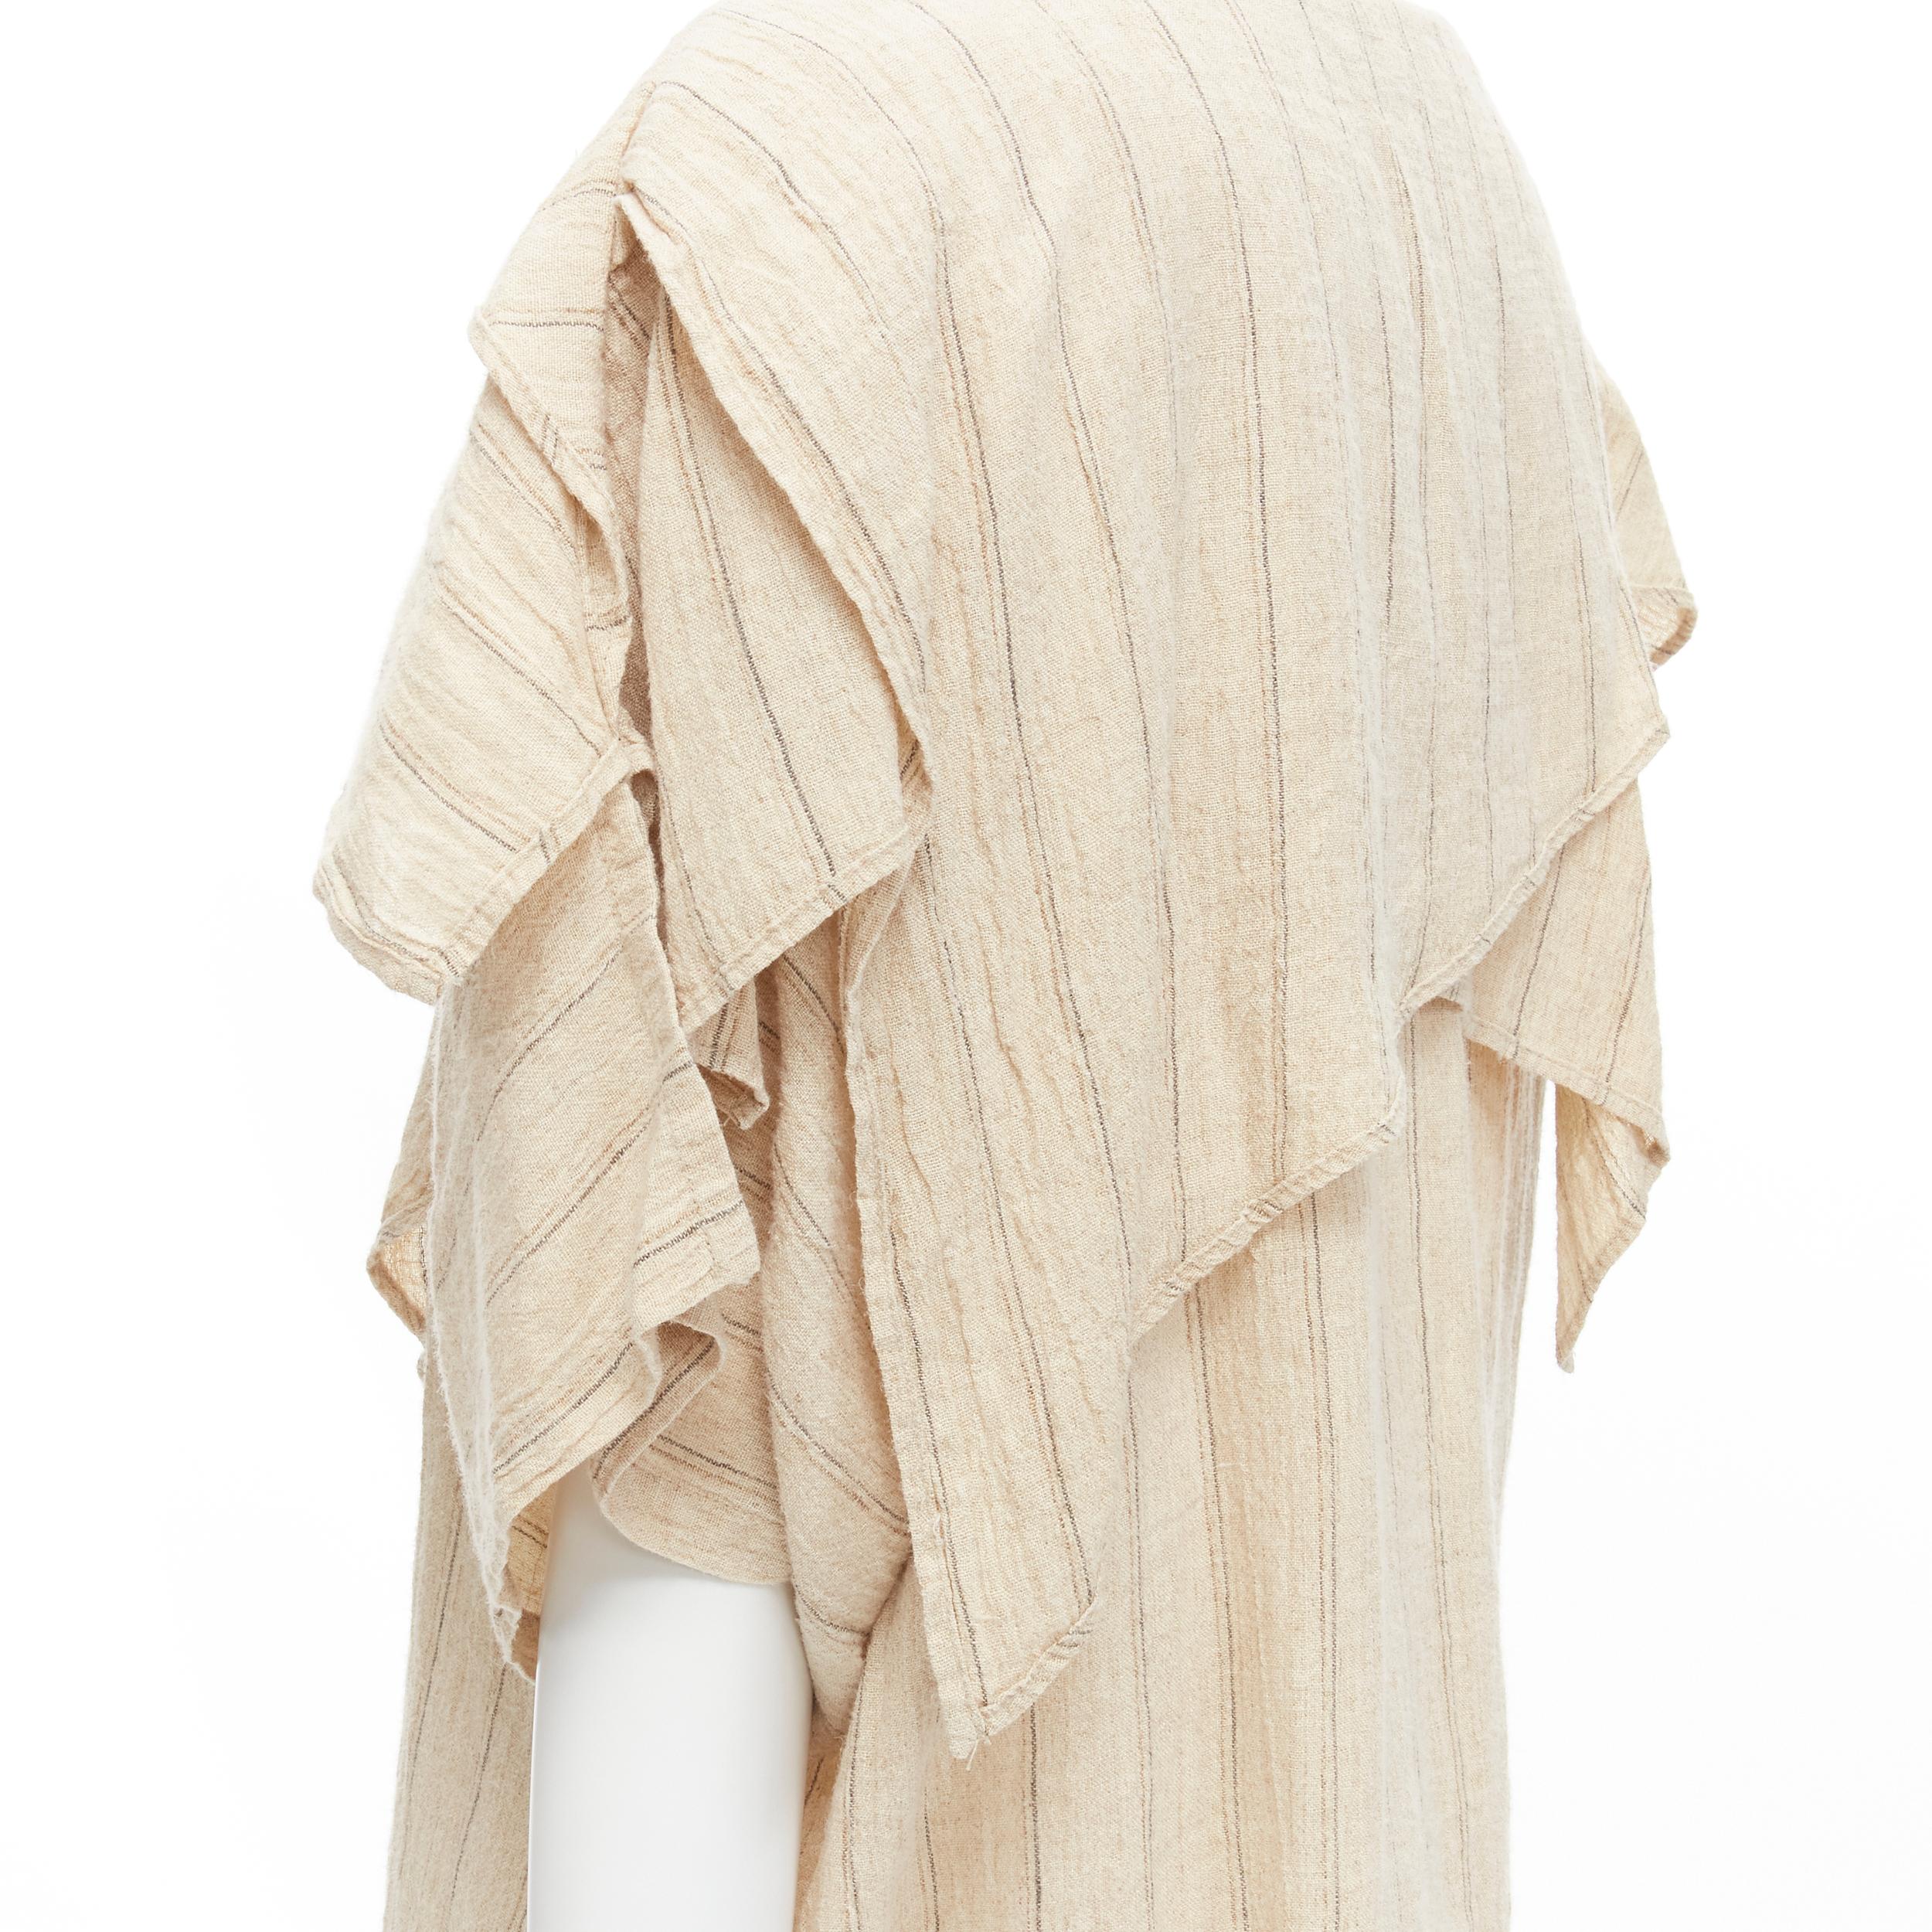 ISSEY MIYAKE 1980s beige striped linen asymmetric ruffle collar top S 
Reference: CRTI/A00519 
Brand: Issey Miyake 
Material: Linen 
Color: Beige 
Pattern: Striped 
Made in: Japan 

CONDITION: 
Condition: Excellent, this item was pre-owned and is in